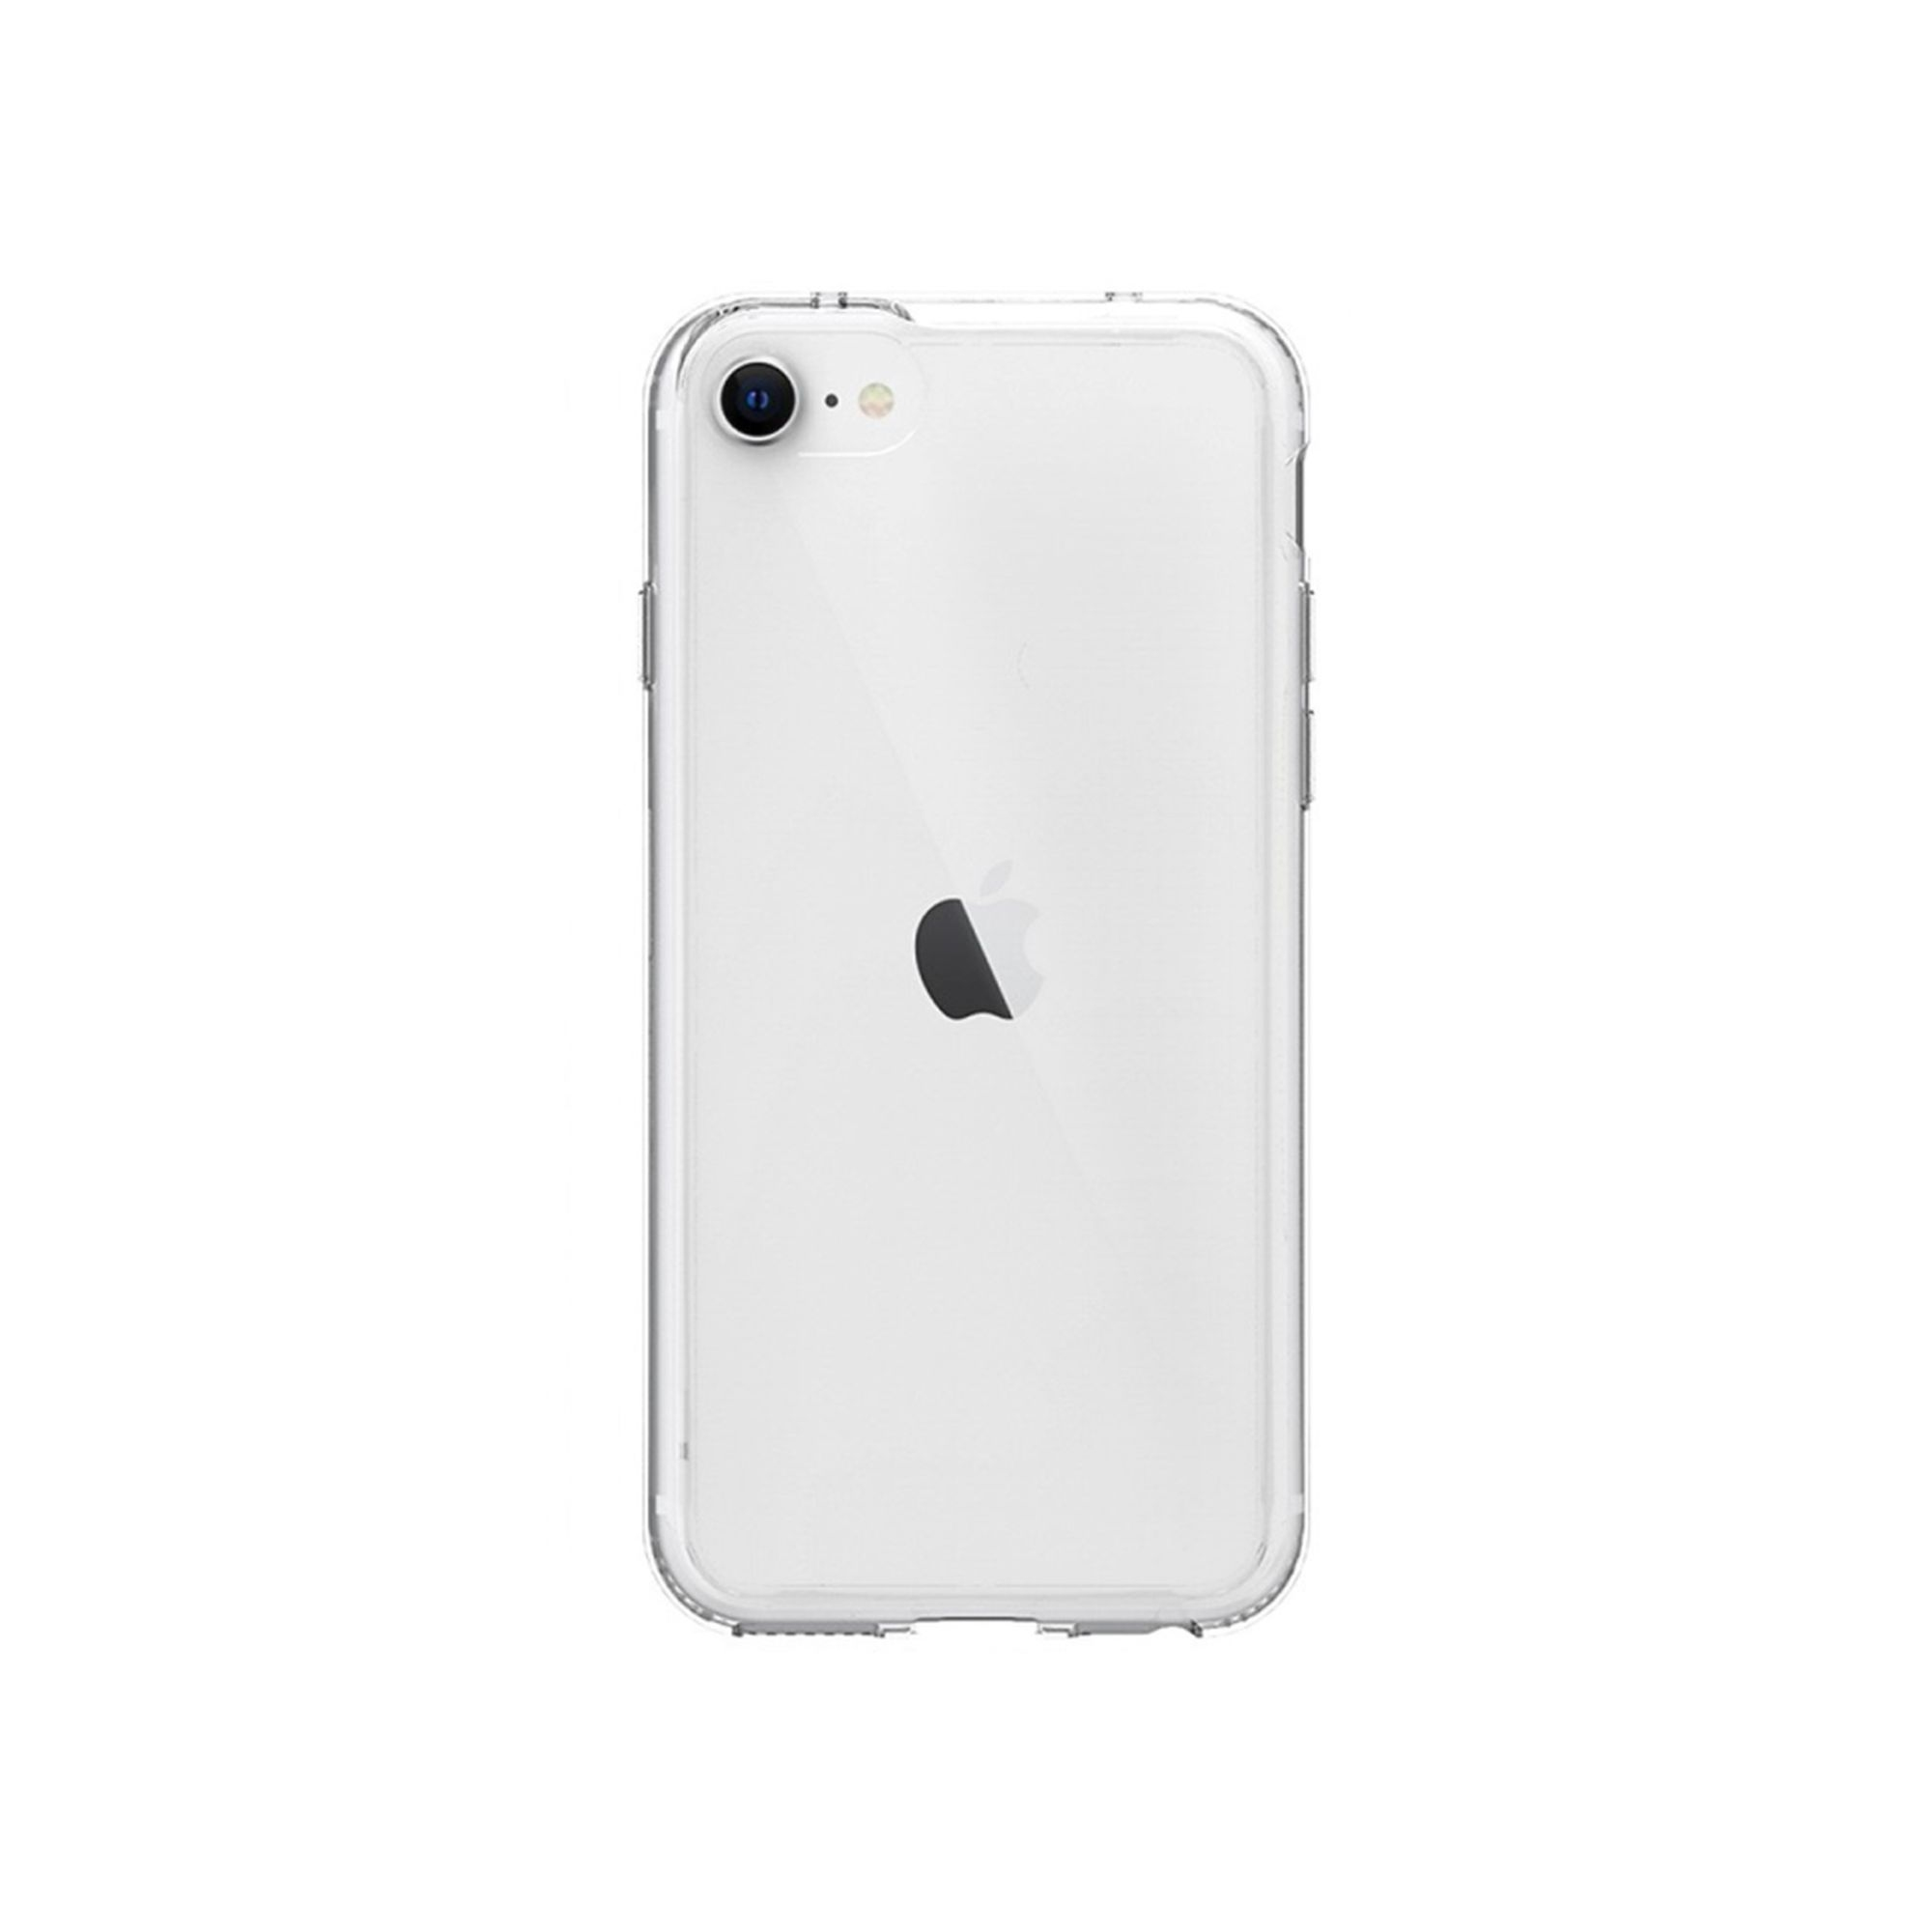 Backcover, iPhone SE Apple, 8 / Pankow transparent (2020) BERLIN / Clear, 7, JT